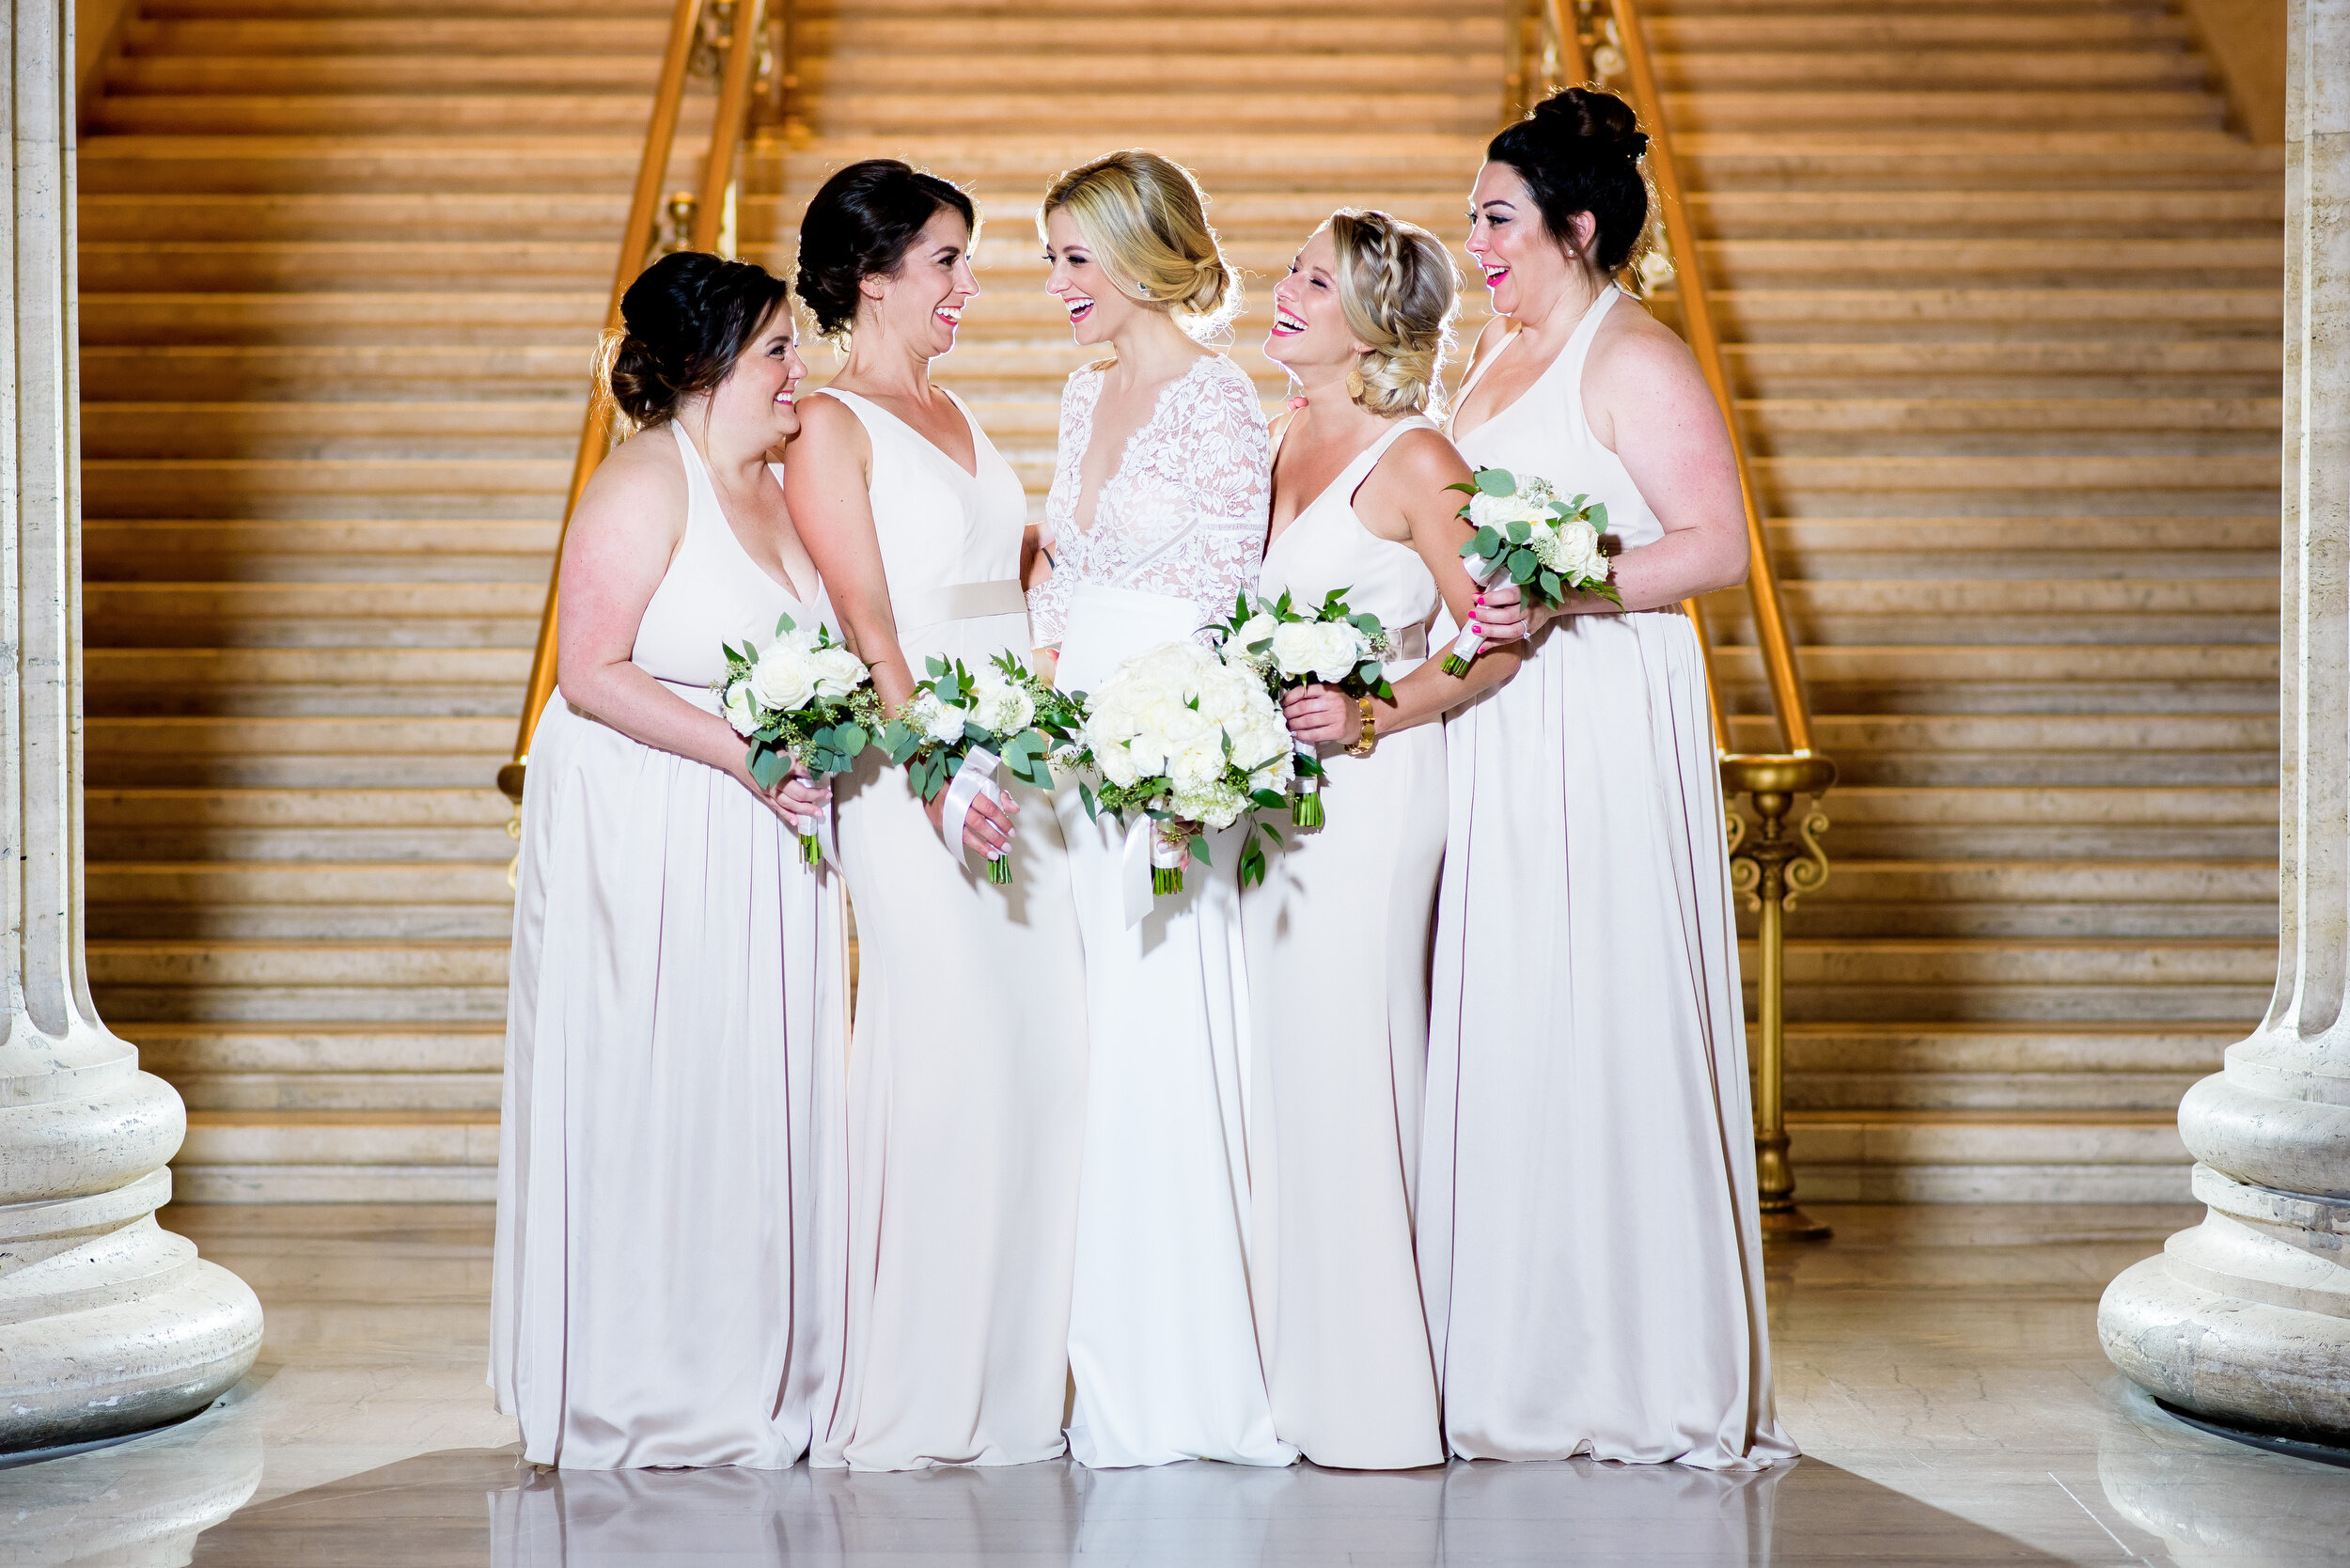 Bridal portrait at Union Station Chicago: Geraghty Chicago wedding photography captured by J. Brown Photography.